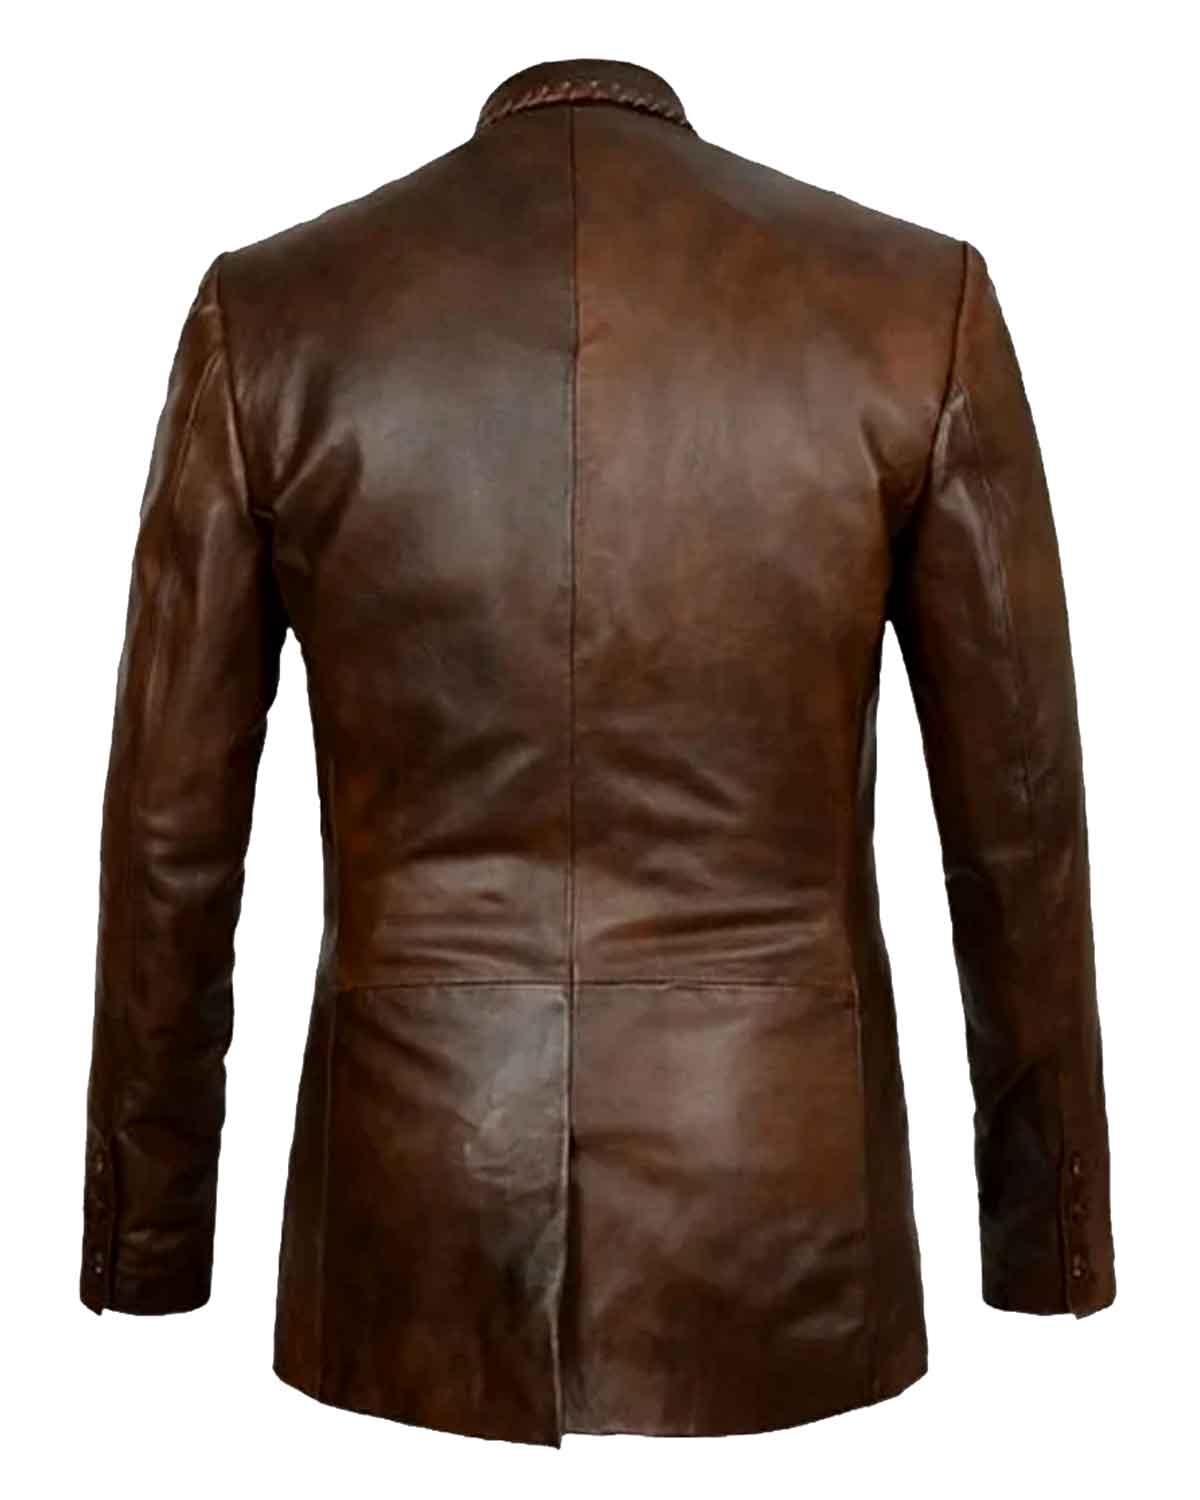 Mens Distressed Brown Lapel Style Leather Blazer